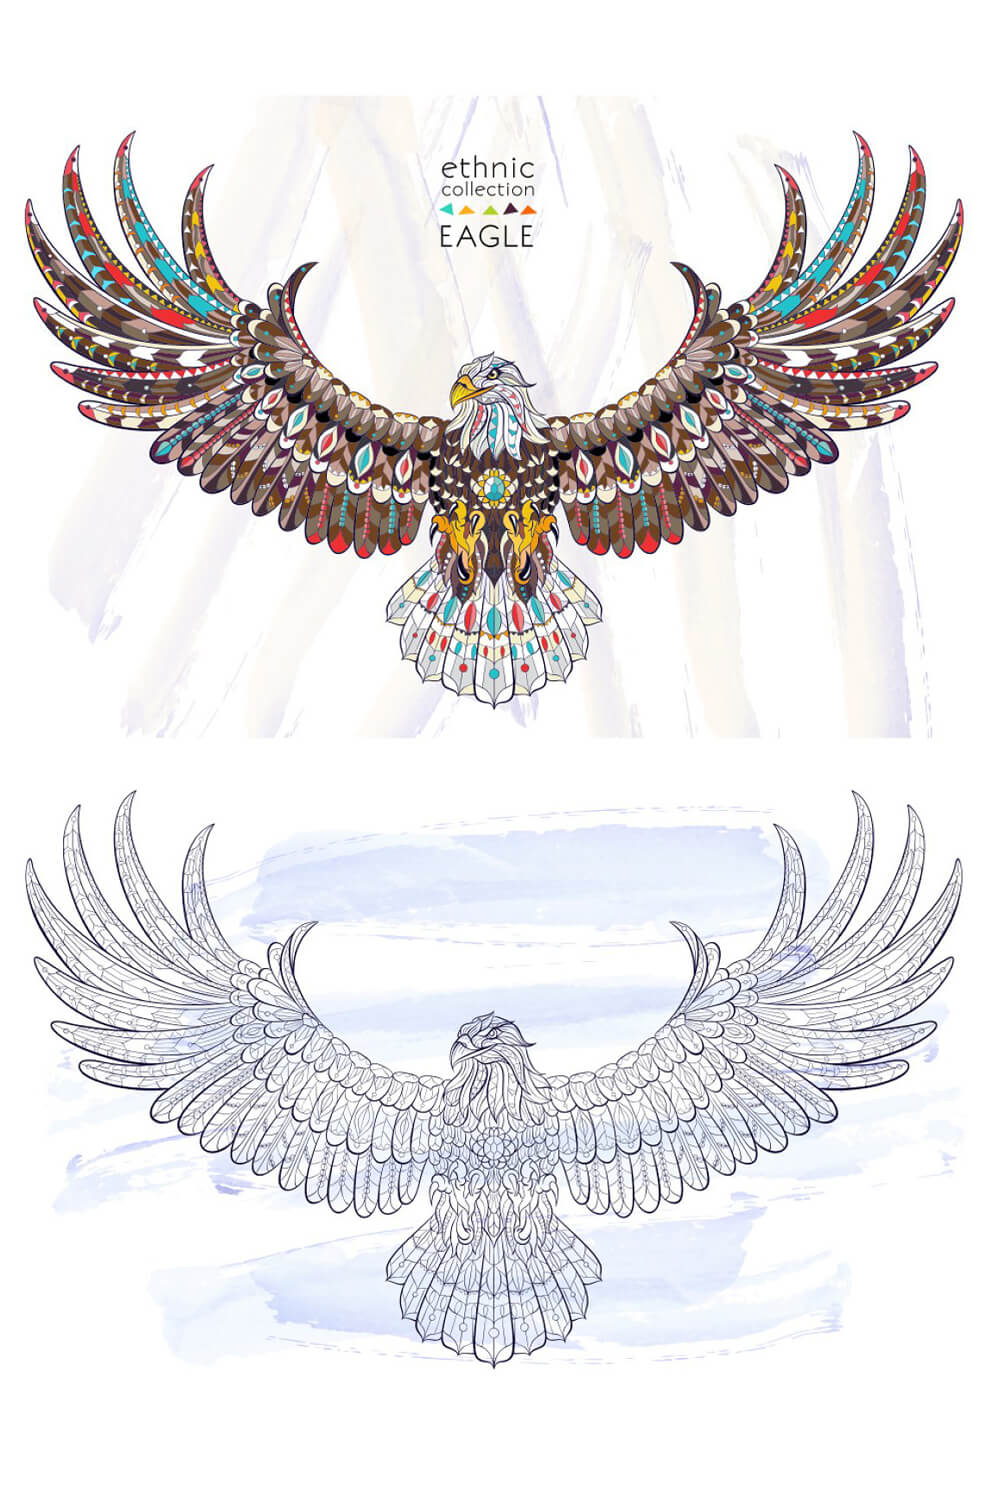 Image of transparent and colored eagles.